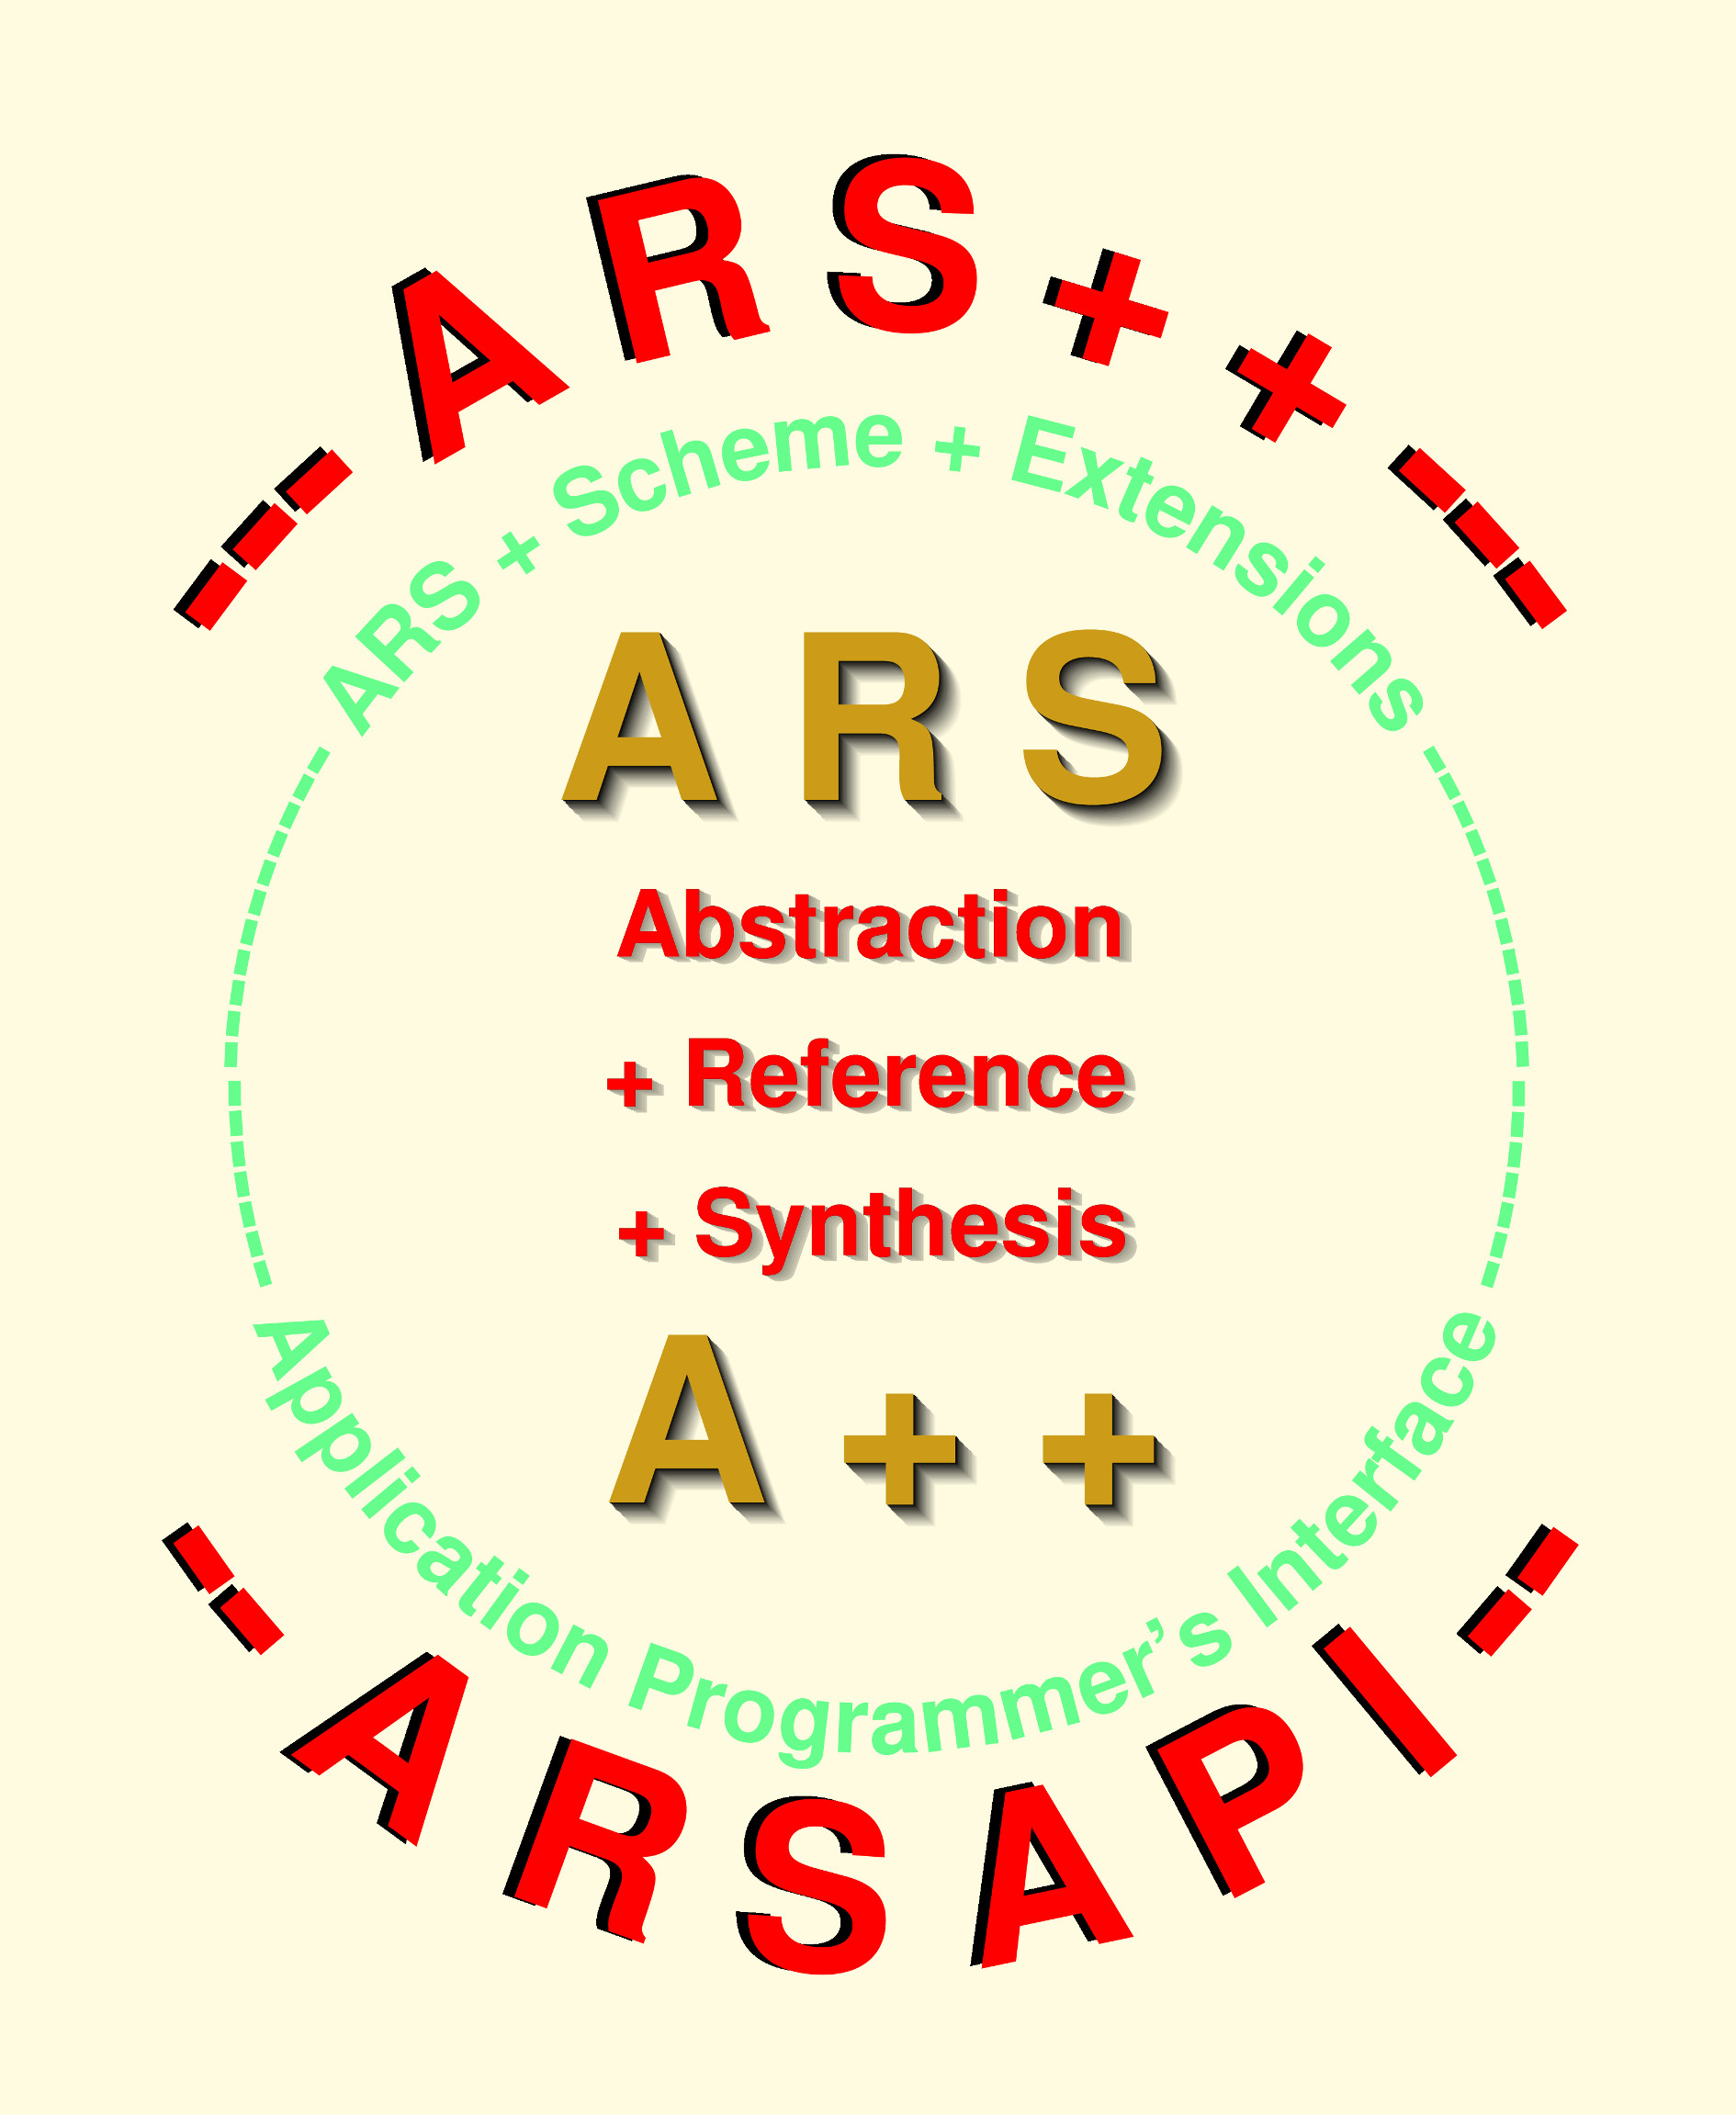 ARSAPI, clam, primitive functions in C,
lambda abstractions in C, virtual machine language, 
implementation of ARS in C 